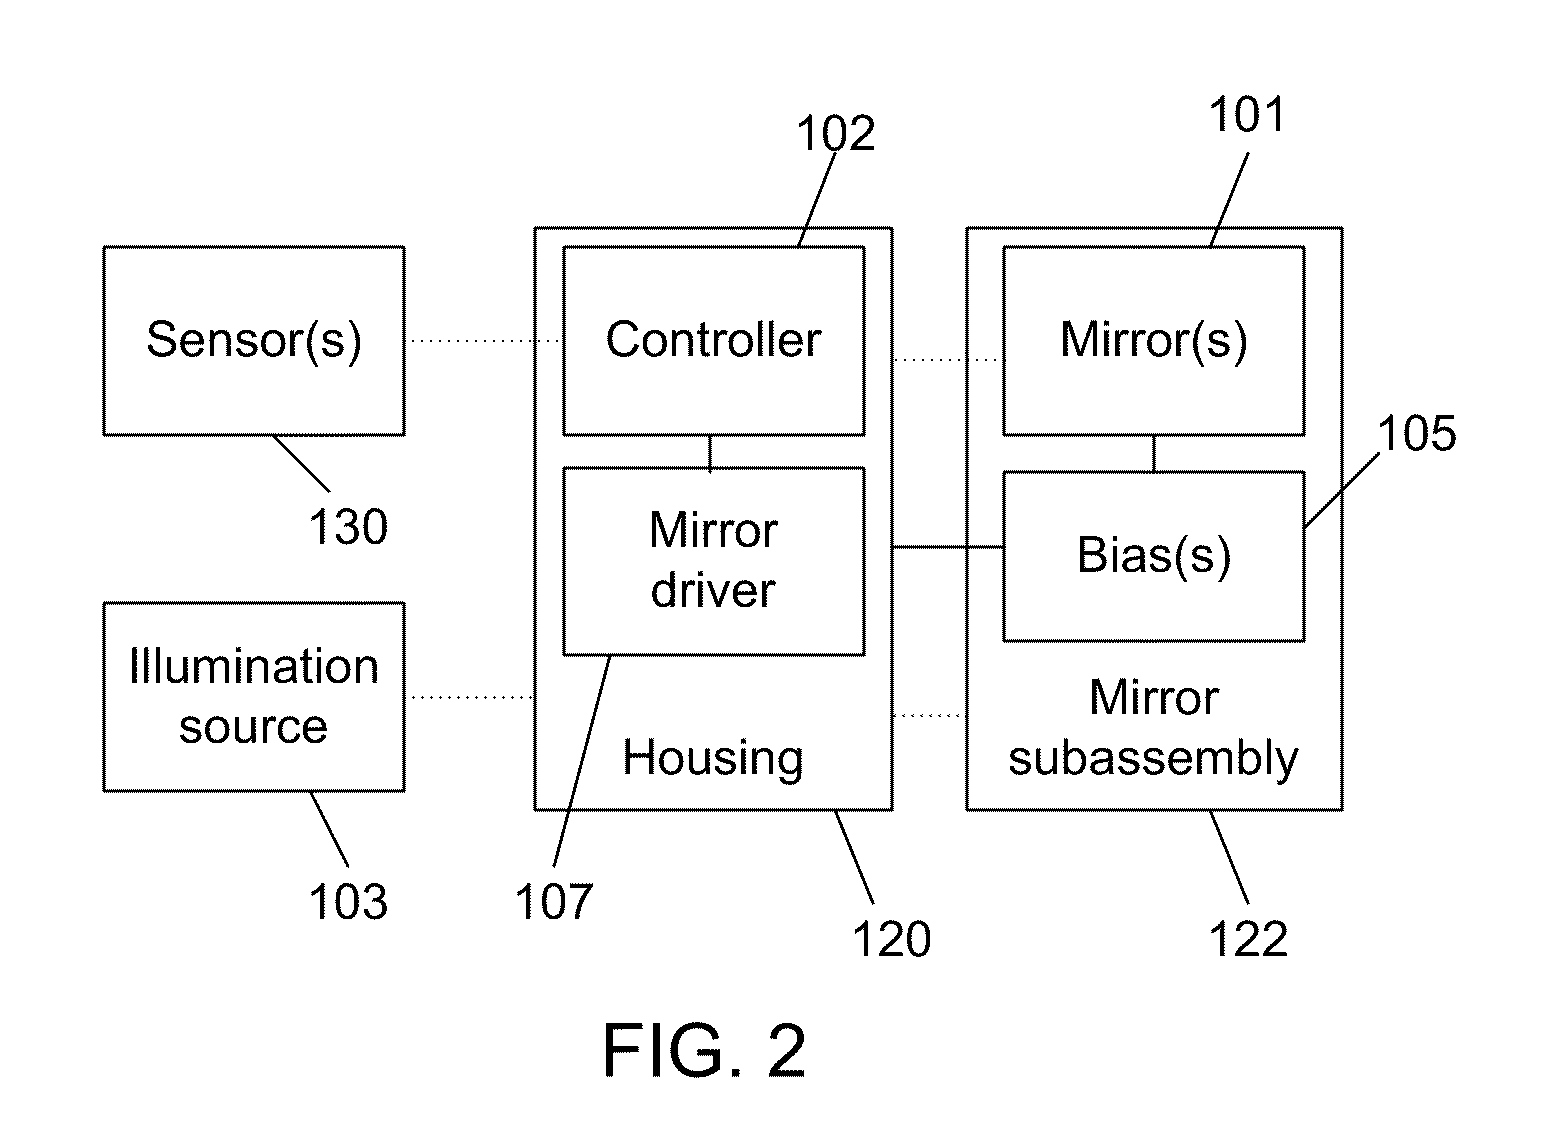 Devices and methods for generating beam patterns with controllable intensity, color, or information content